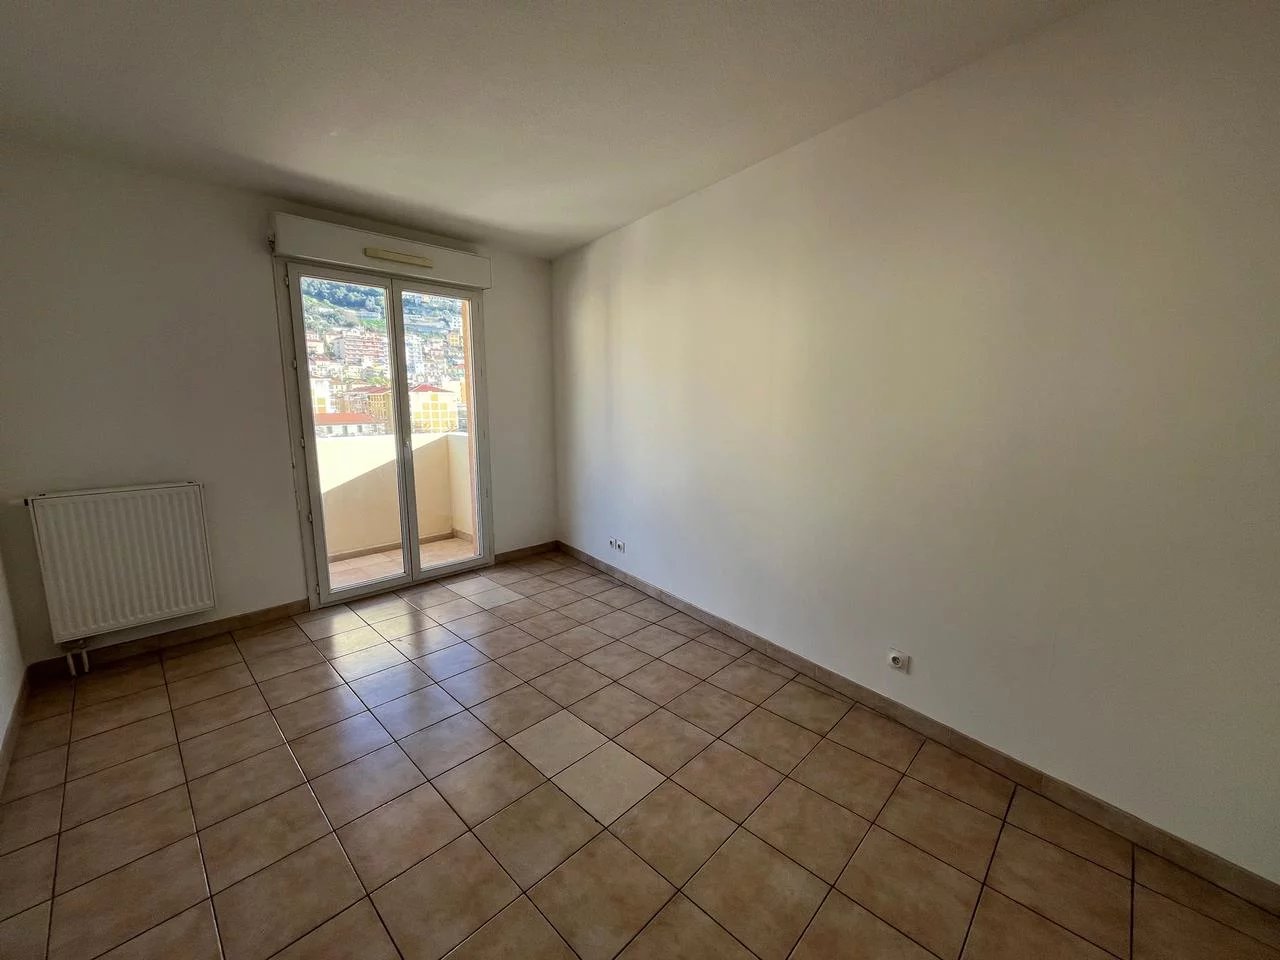 Appartement  3 Rooms 62m2  for sale   250 000 €